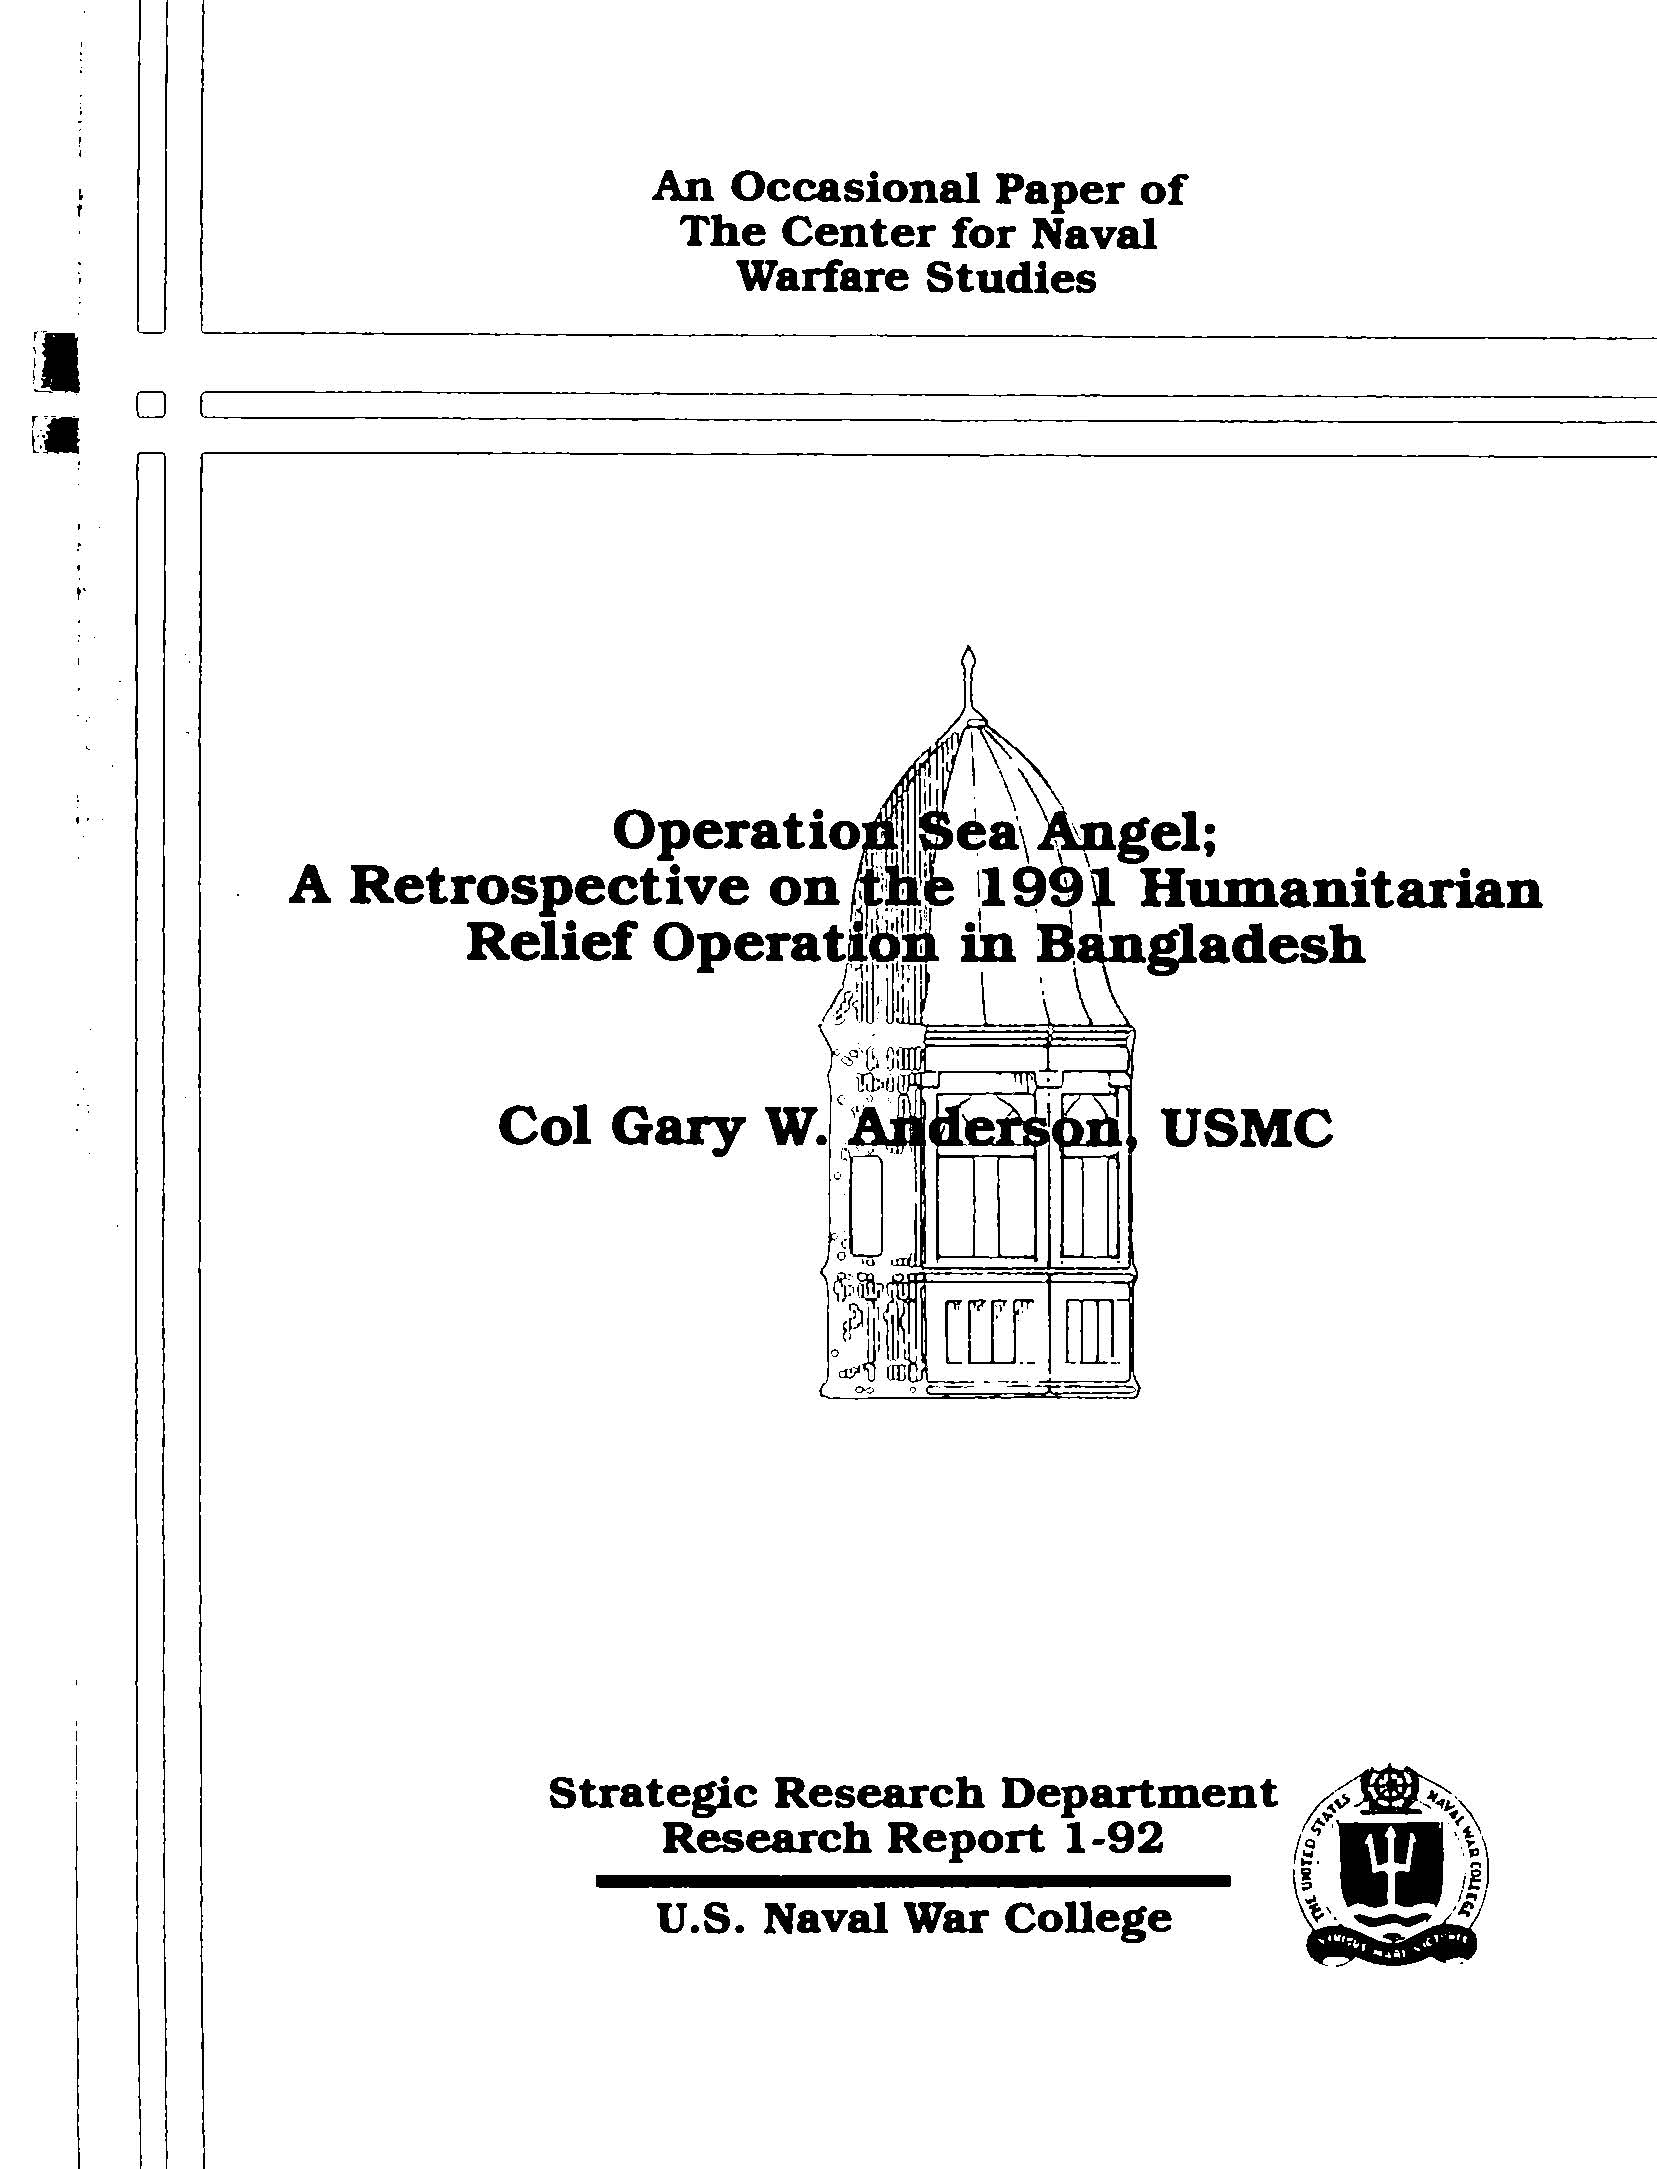 Operation Sea Angel; A Retrospective on the 1991 Humanitarian Relief Operation In Bangladesh, by Gary W. Anderson